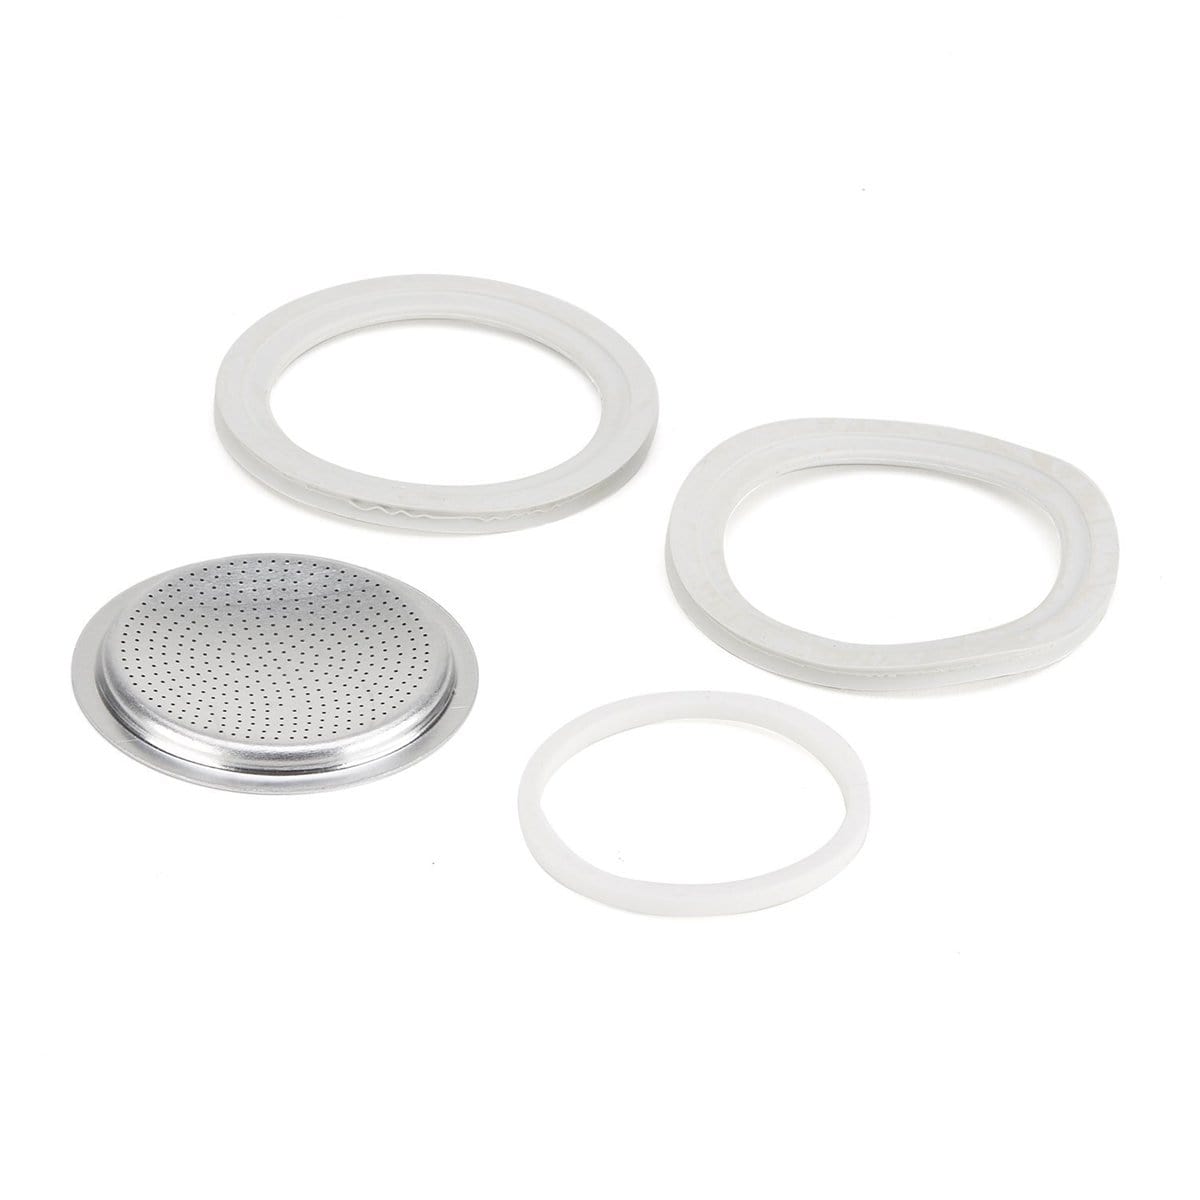 https://kitchenandcompany.com/cdn/shop/products/bialetti-bialetti-6-cup-replacement-gaskets-and-filter-8006363010412-19595162517664_1200x.jpg?v=1604146532